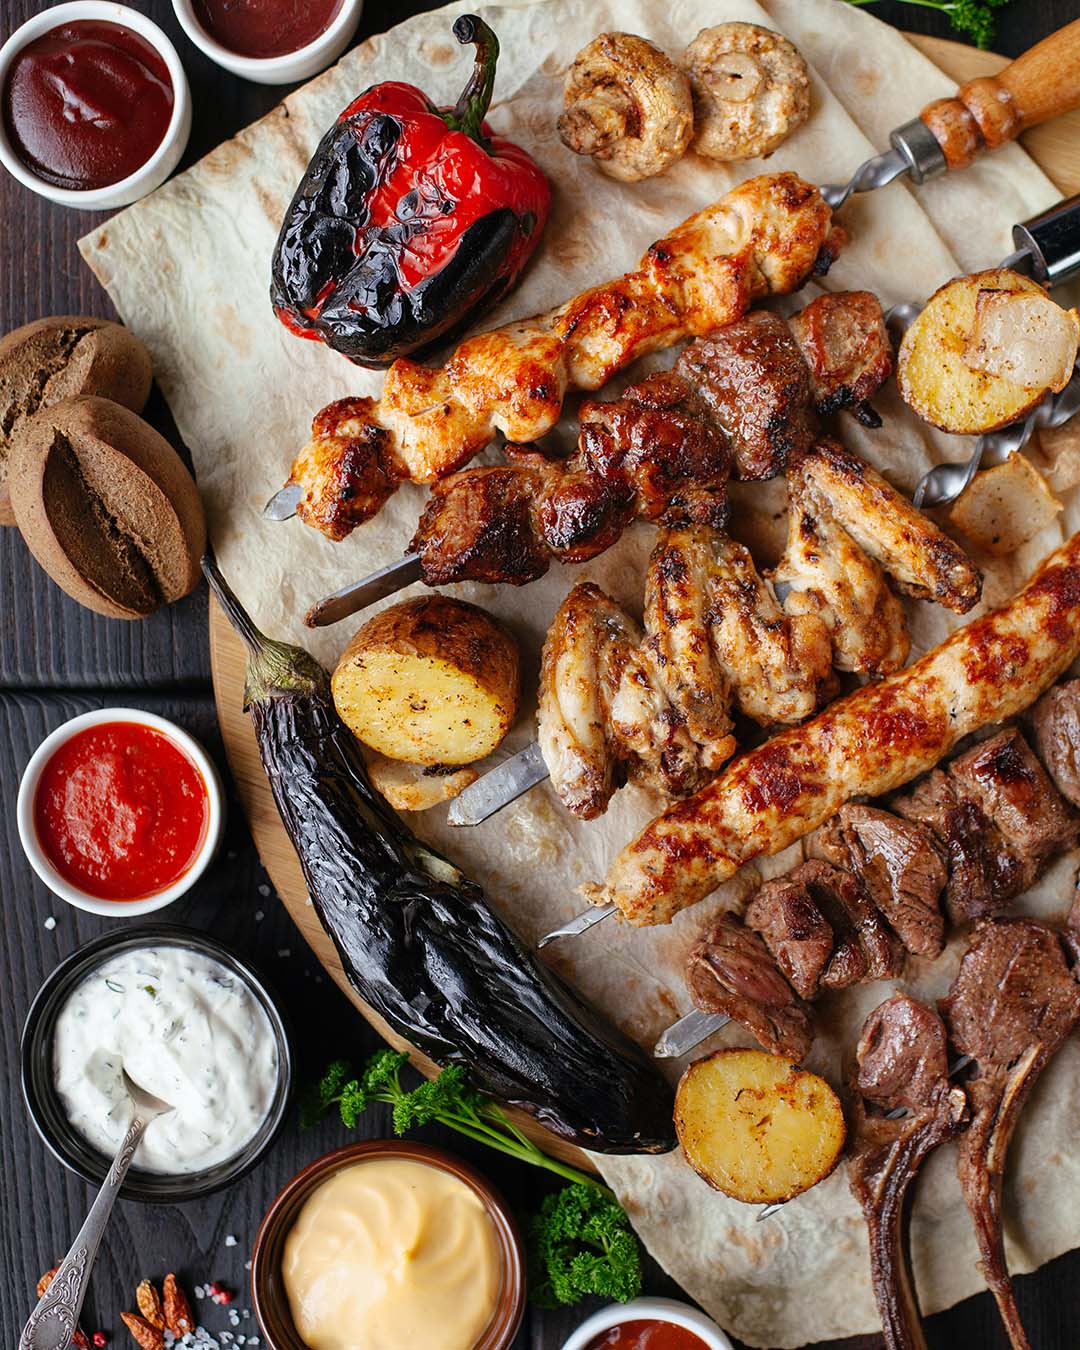 wedding food ideas various grilled meats and vegetables victoria shes unsplash